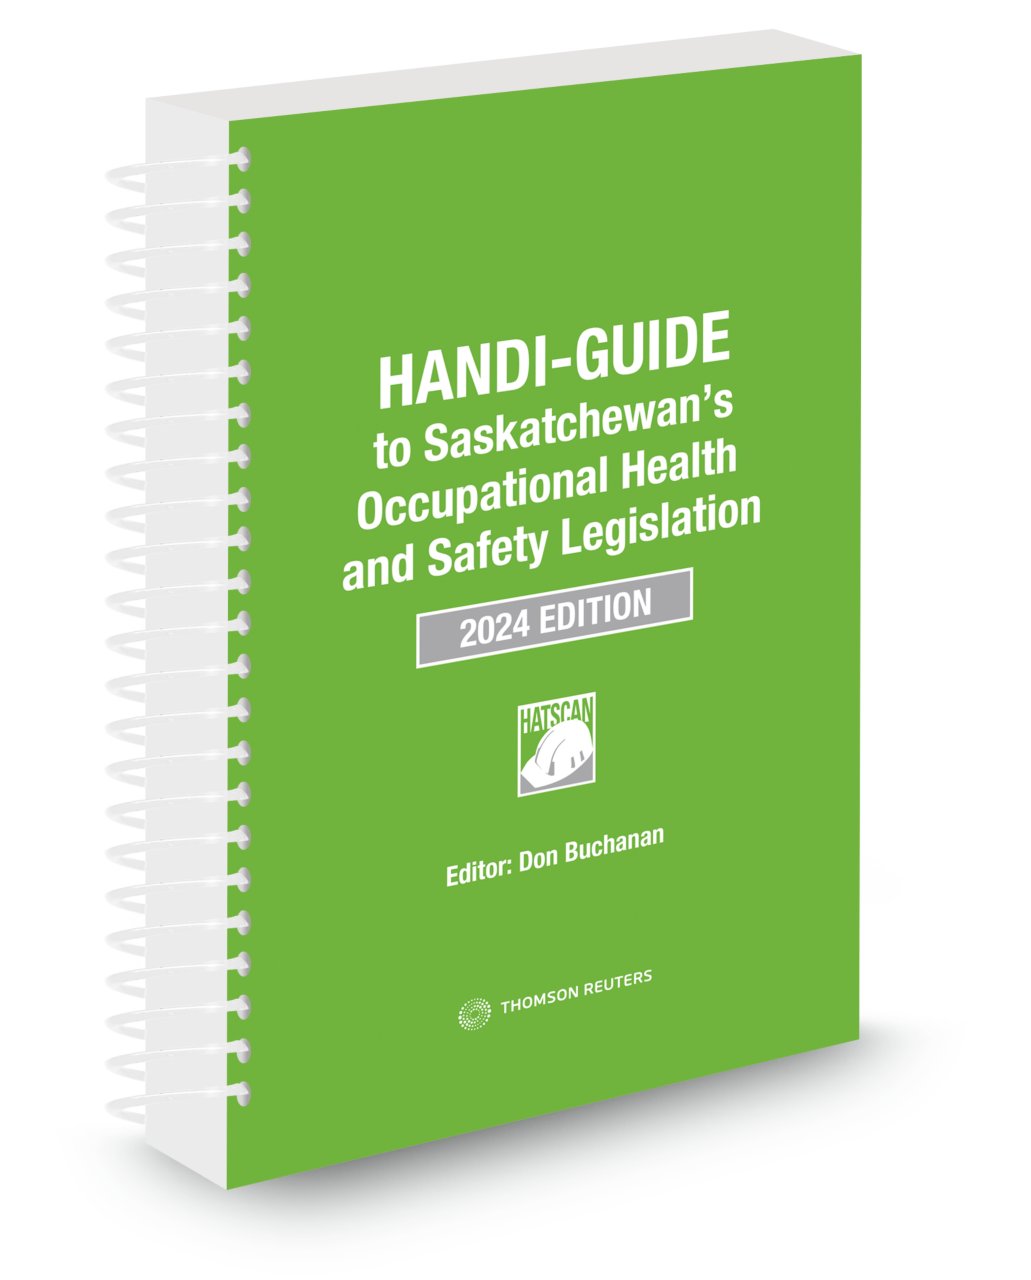 Front cover image for the HANDI-GUIDE to Saskatchewan's Occupational Health and Safety Legislation, 2024 Edition.